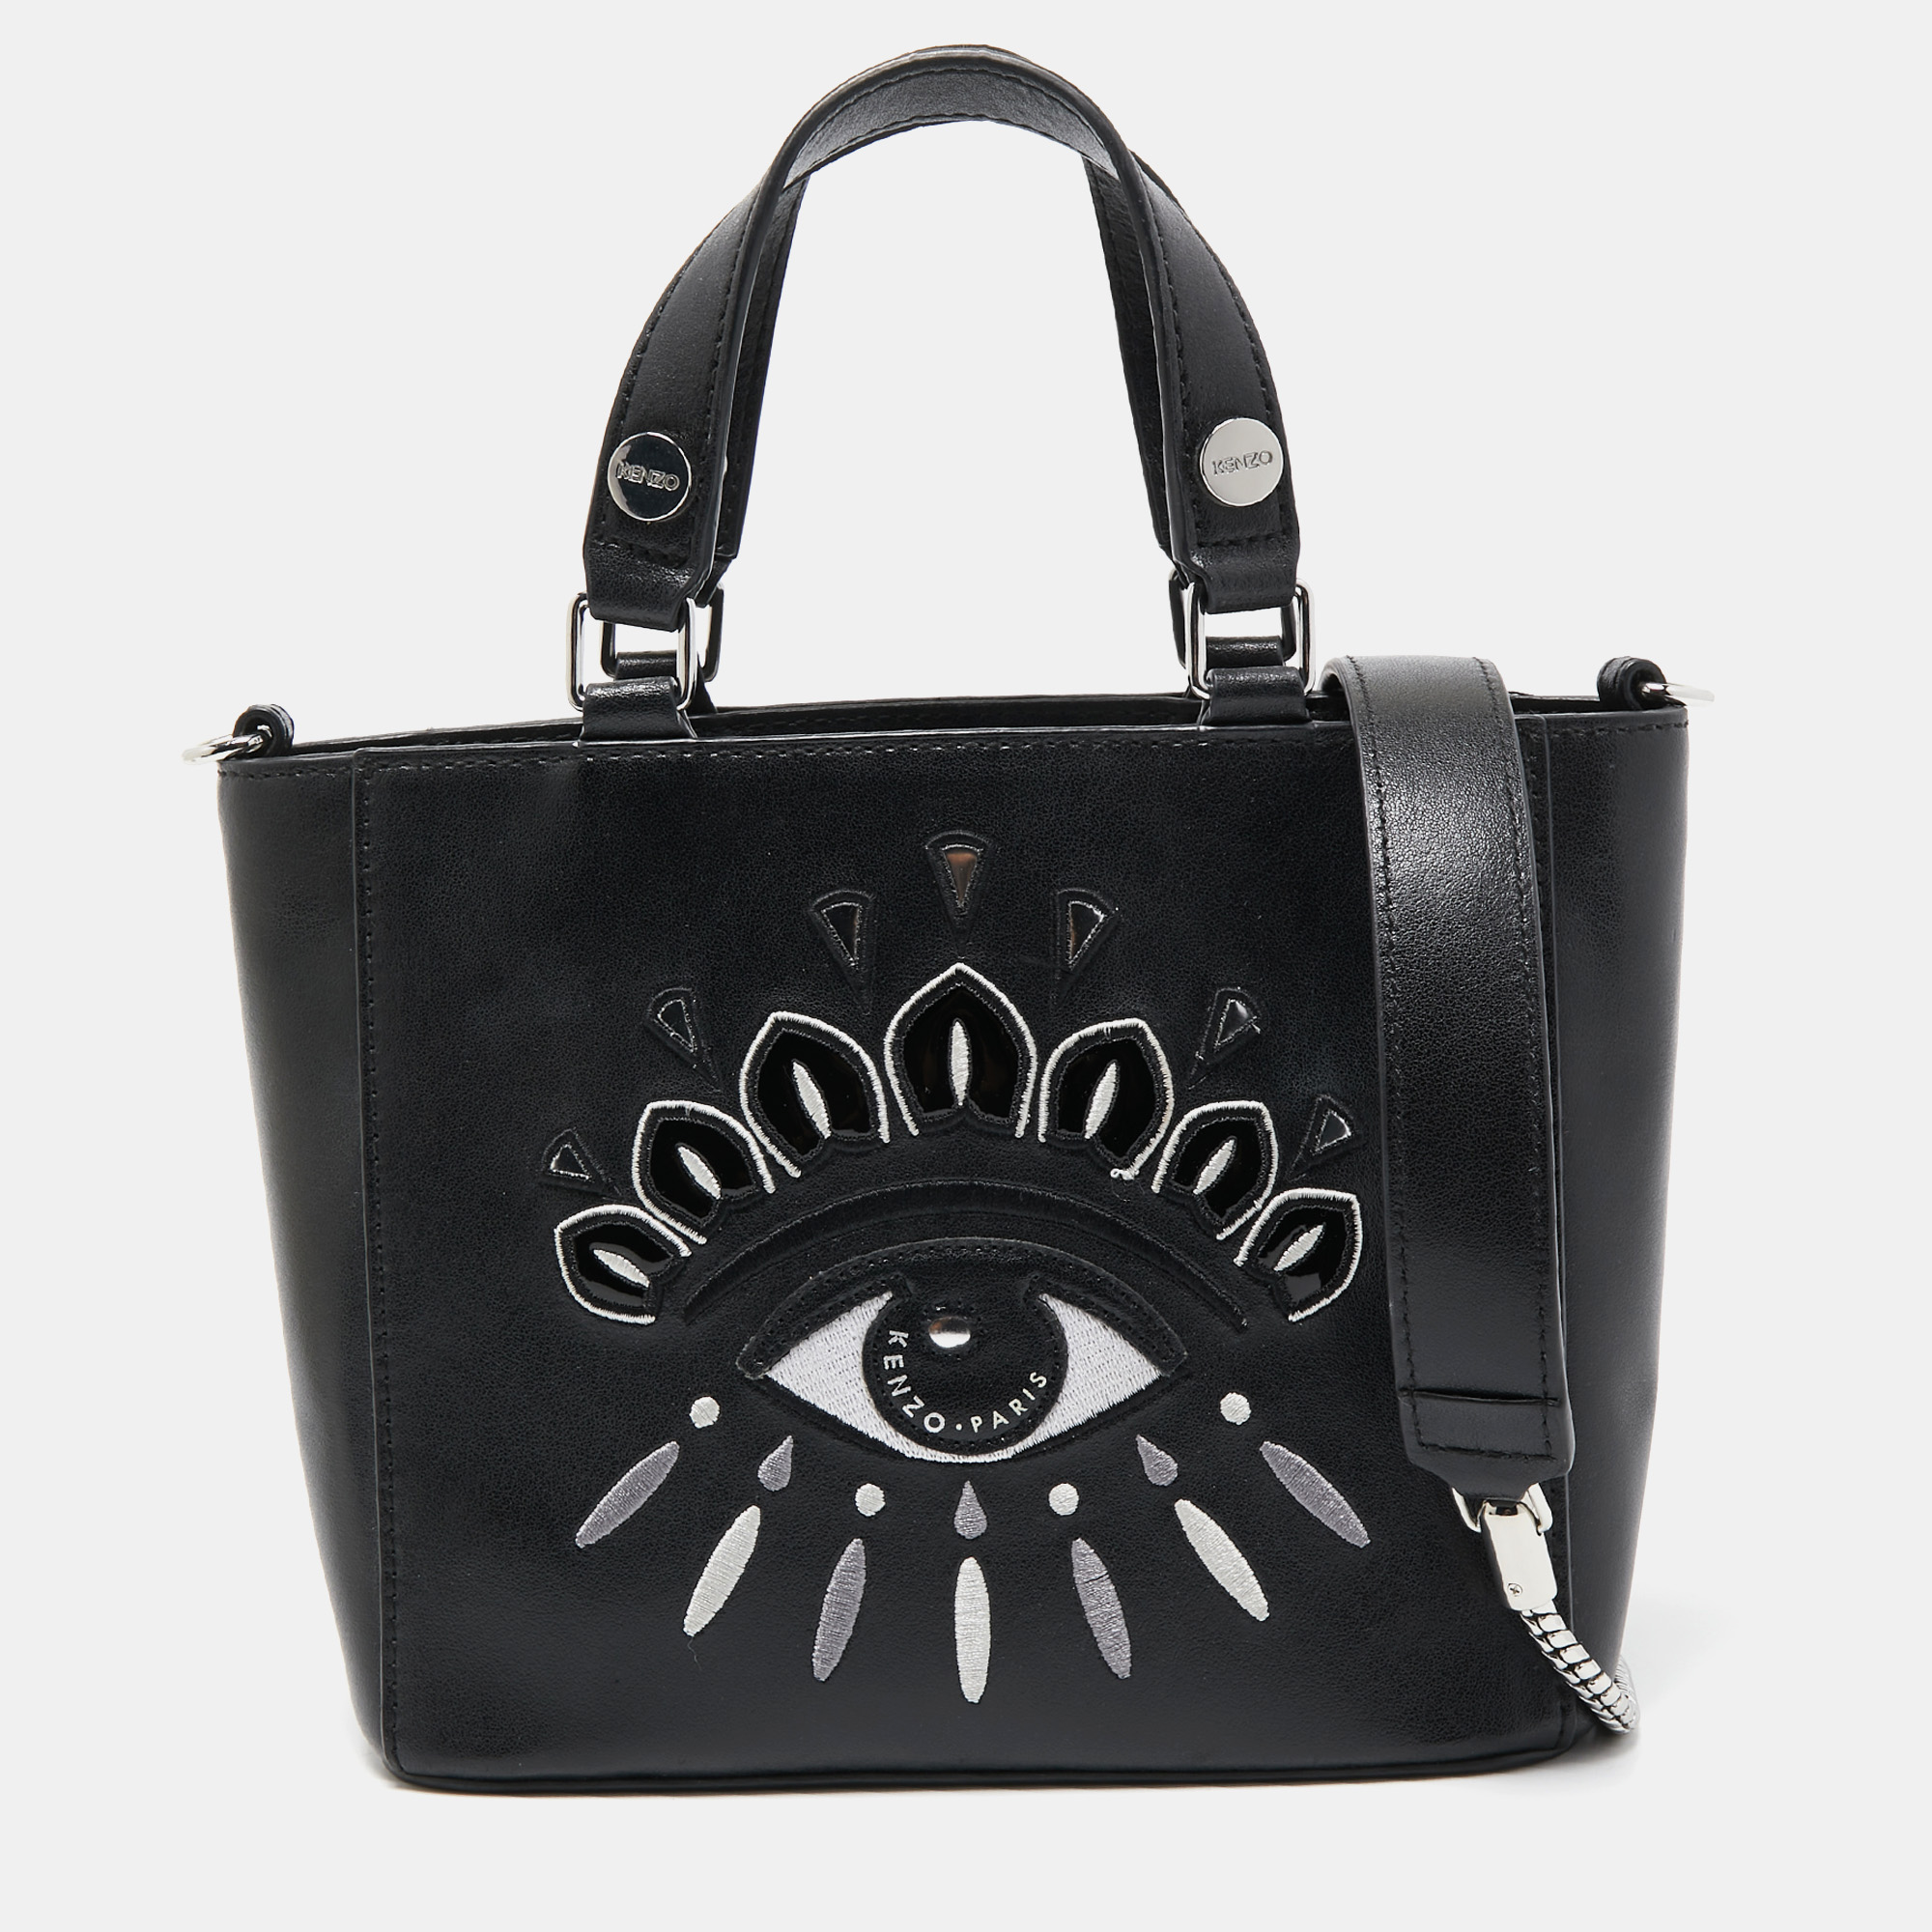 Kenzo black leather eye patch tote